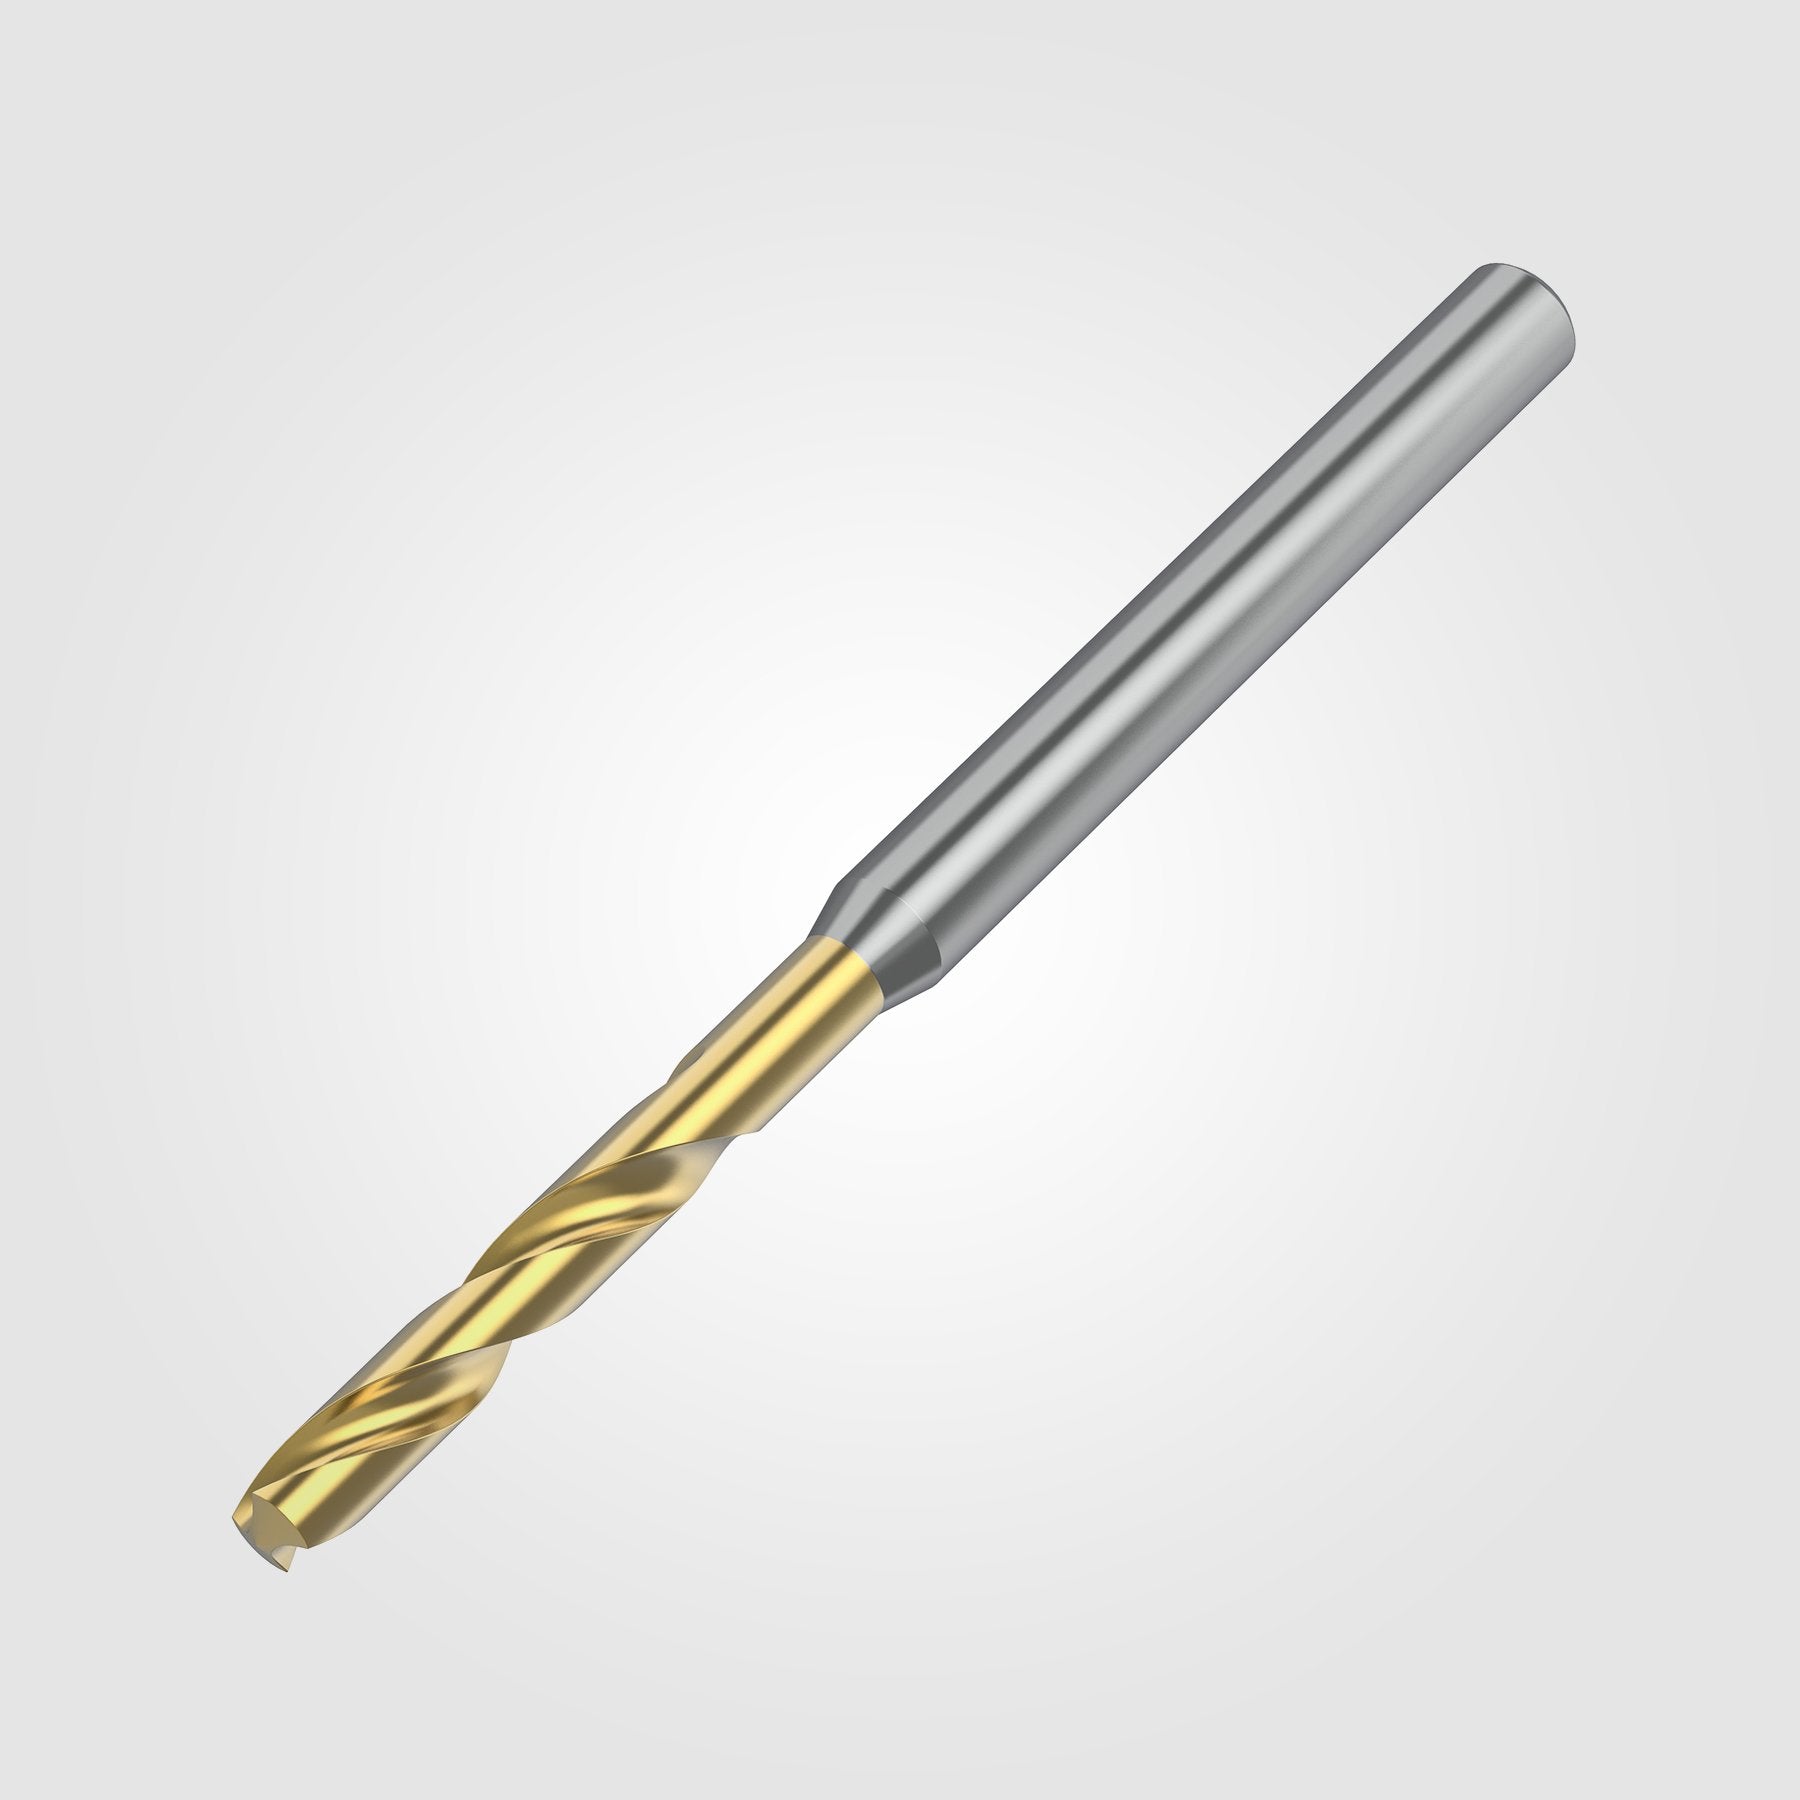 GOdrill (THROUGH COOLANT) | 3.6mm / .1417" / 3xD | SOLID CARBIDE DRILL | 4151111